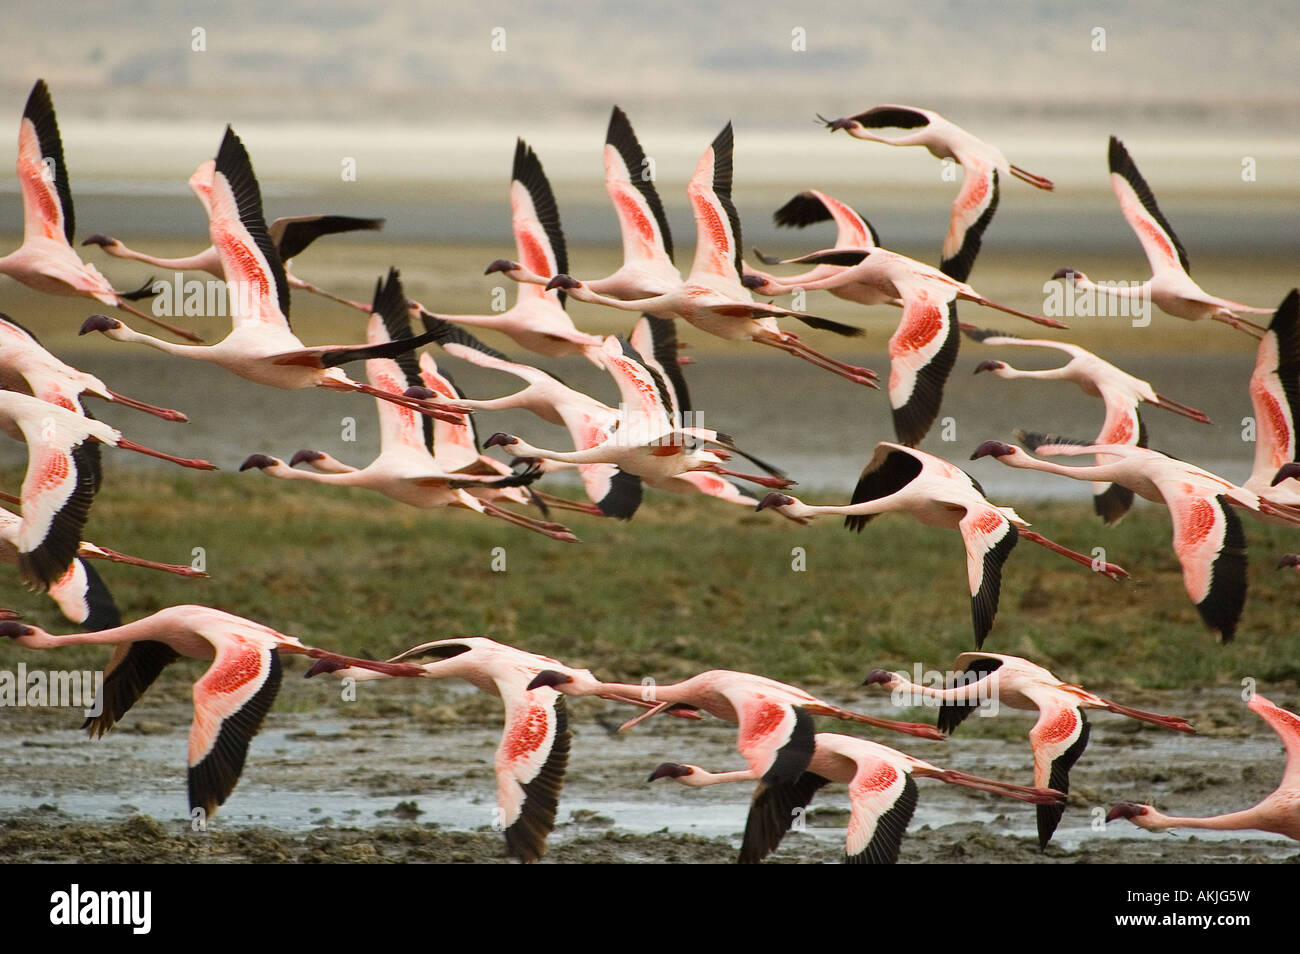 Flamingoes flying low in Ngorongoro Crater, Tanzania, East Africa Stock Photo